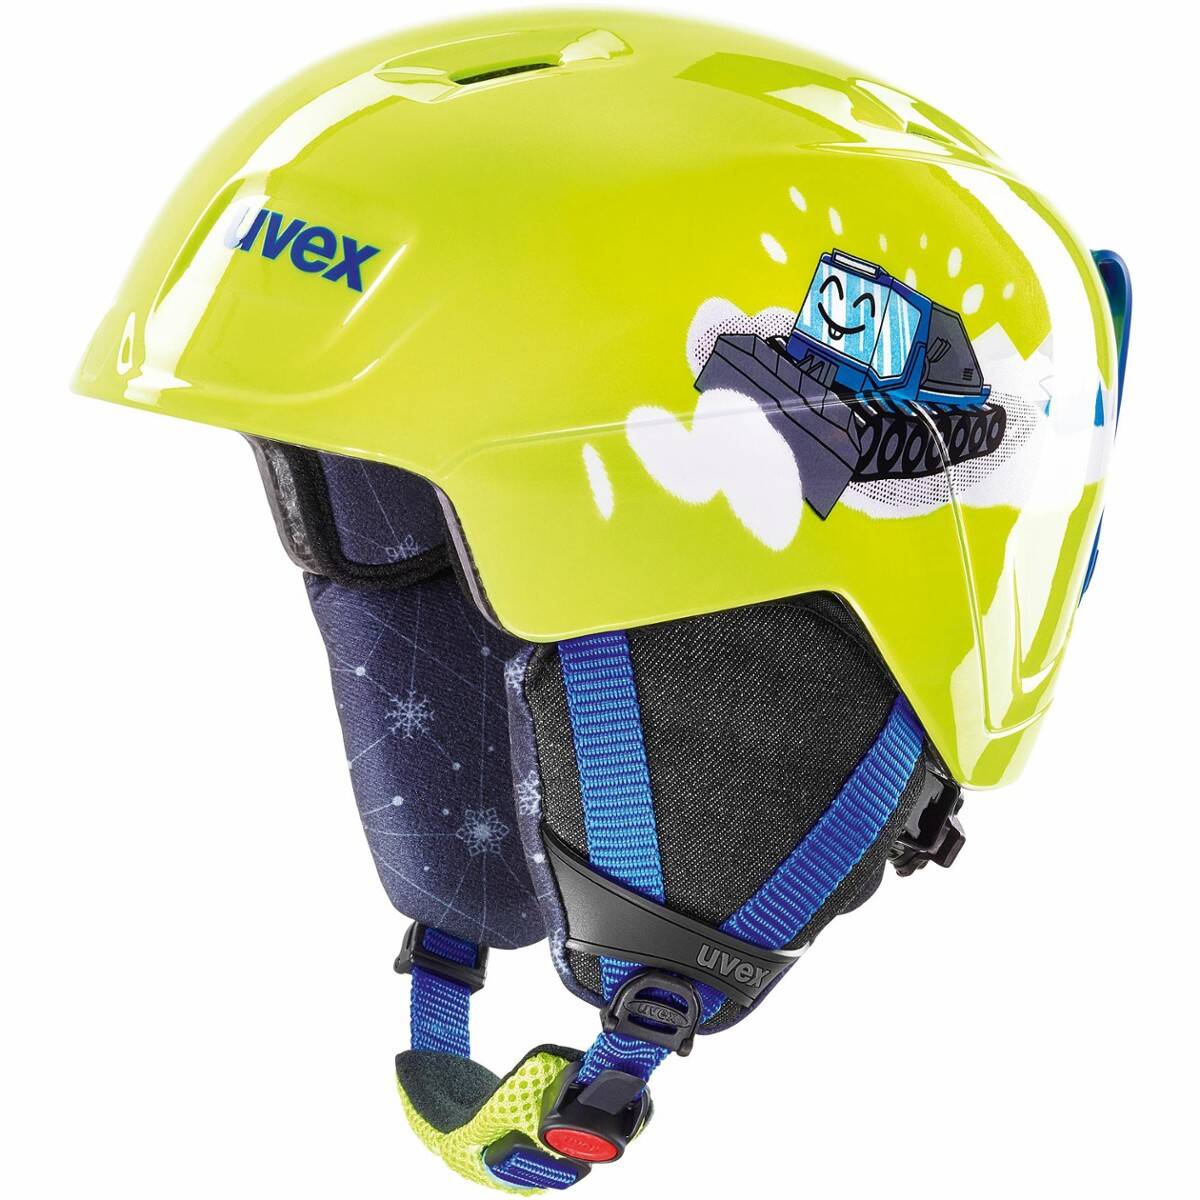 Kask Uvex Manic 46-50cm limonkowy